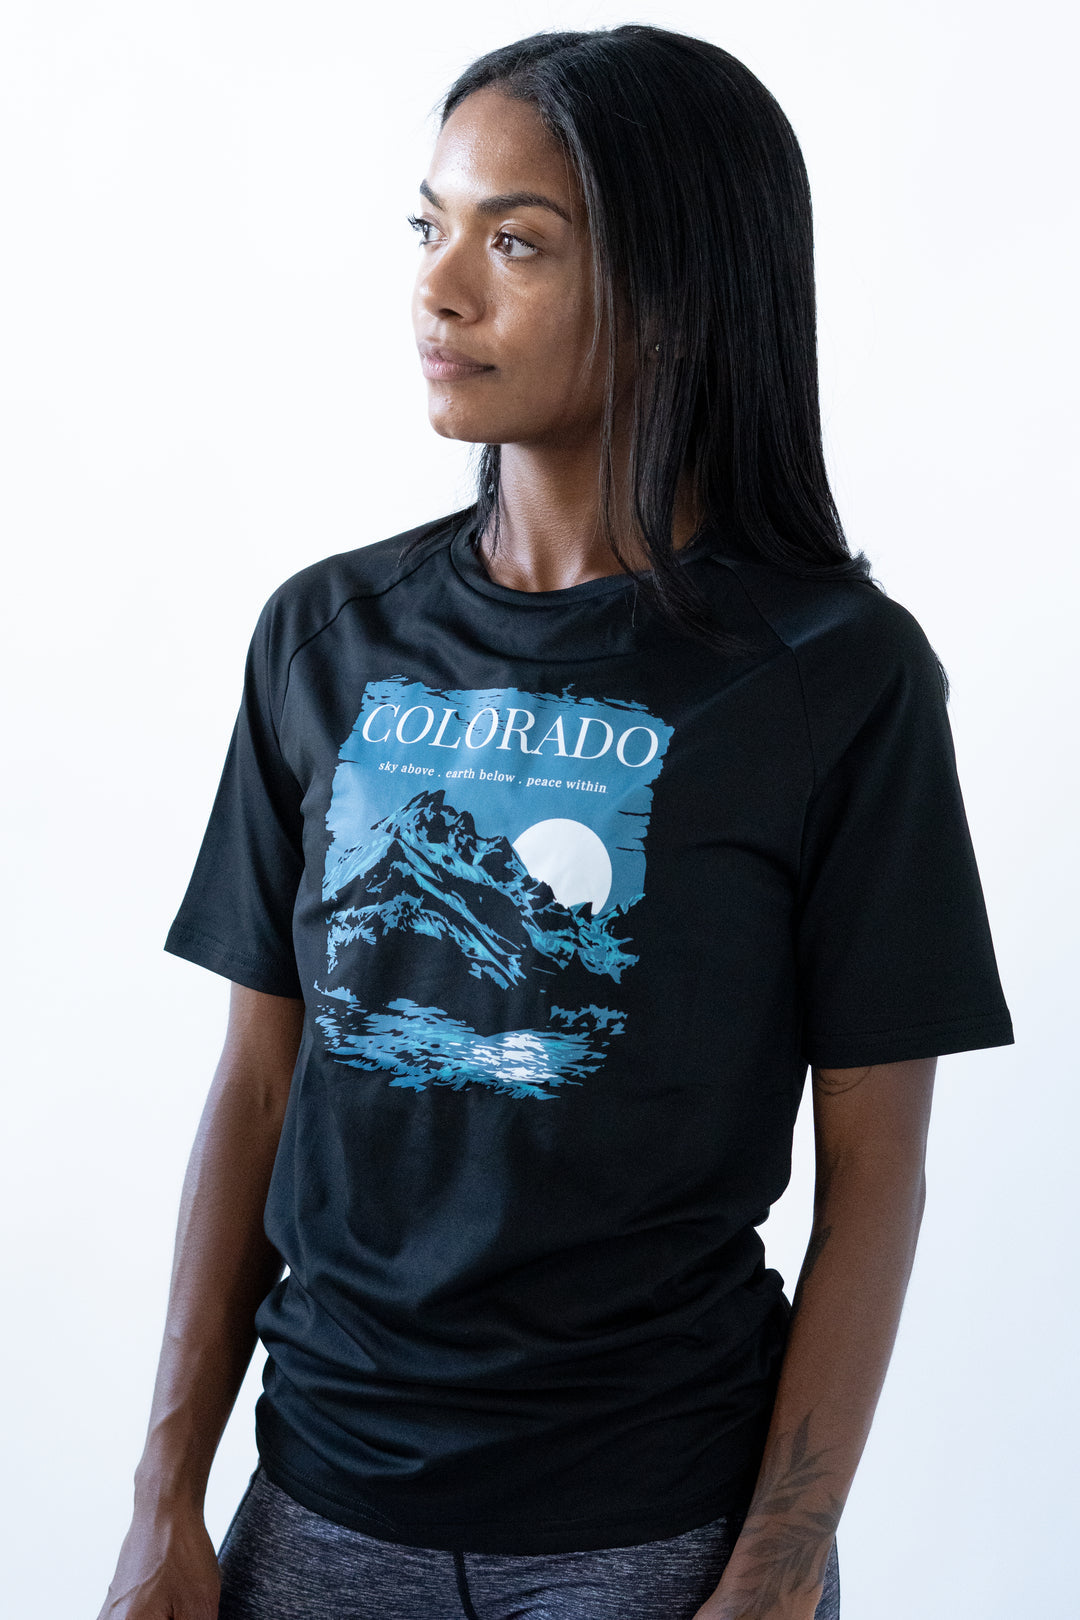 Colorado Sky Above. Earth Below. Peace Within Unisex Performance Tee Black Colorado Threads Clothing